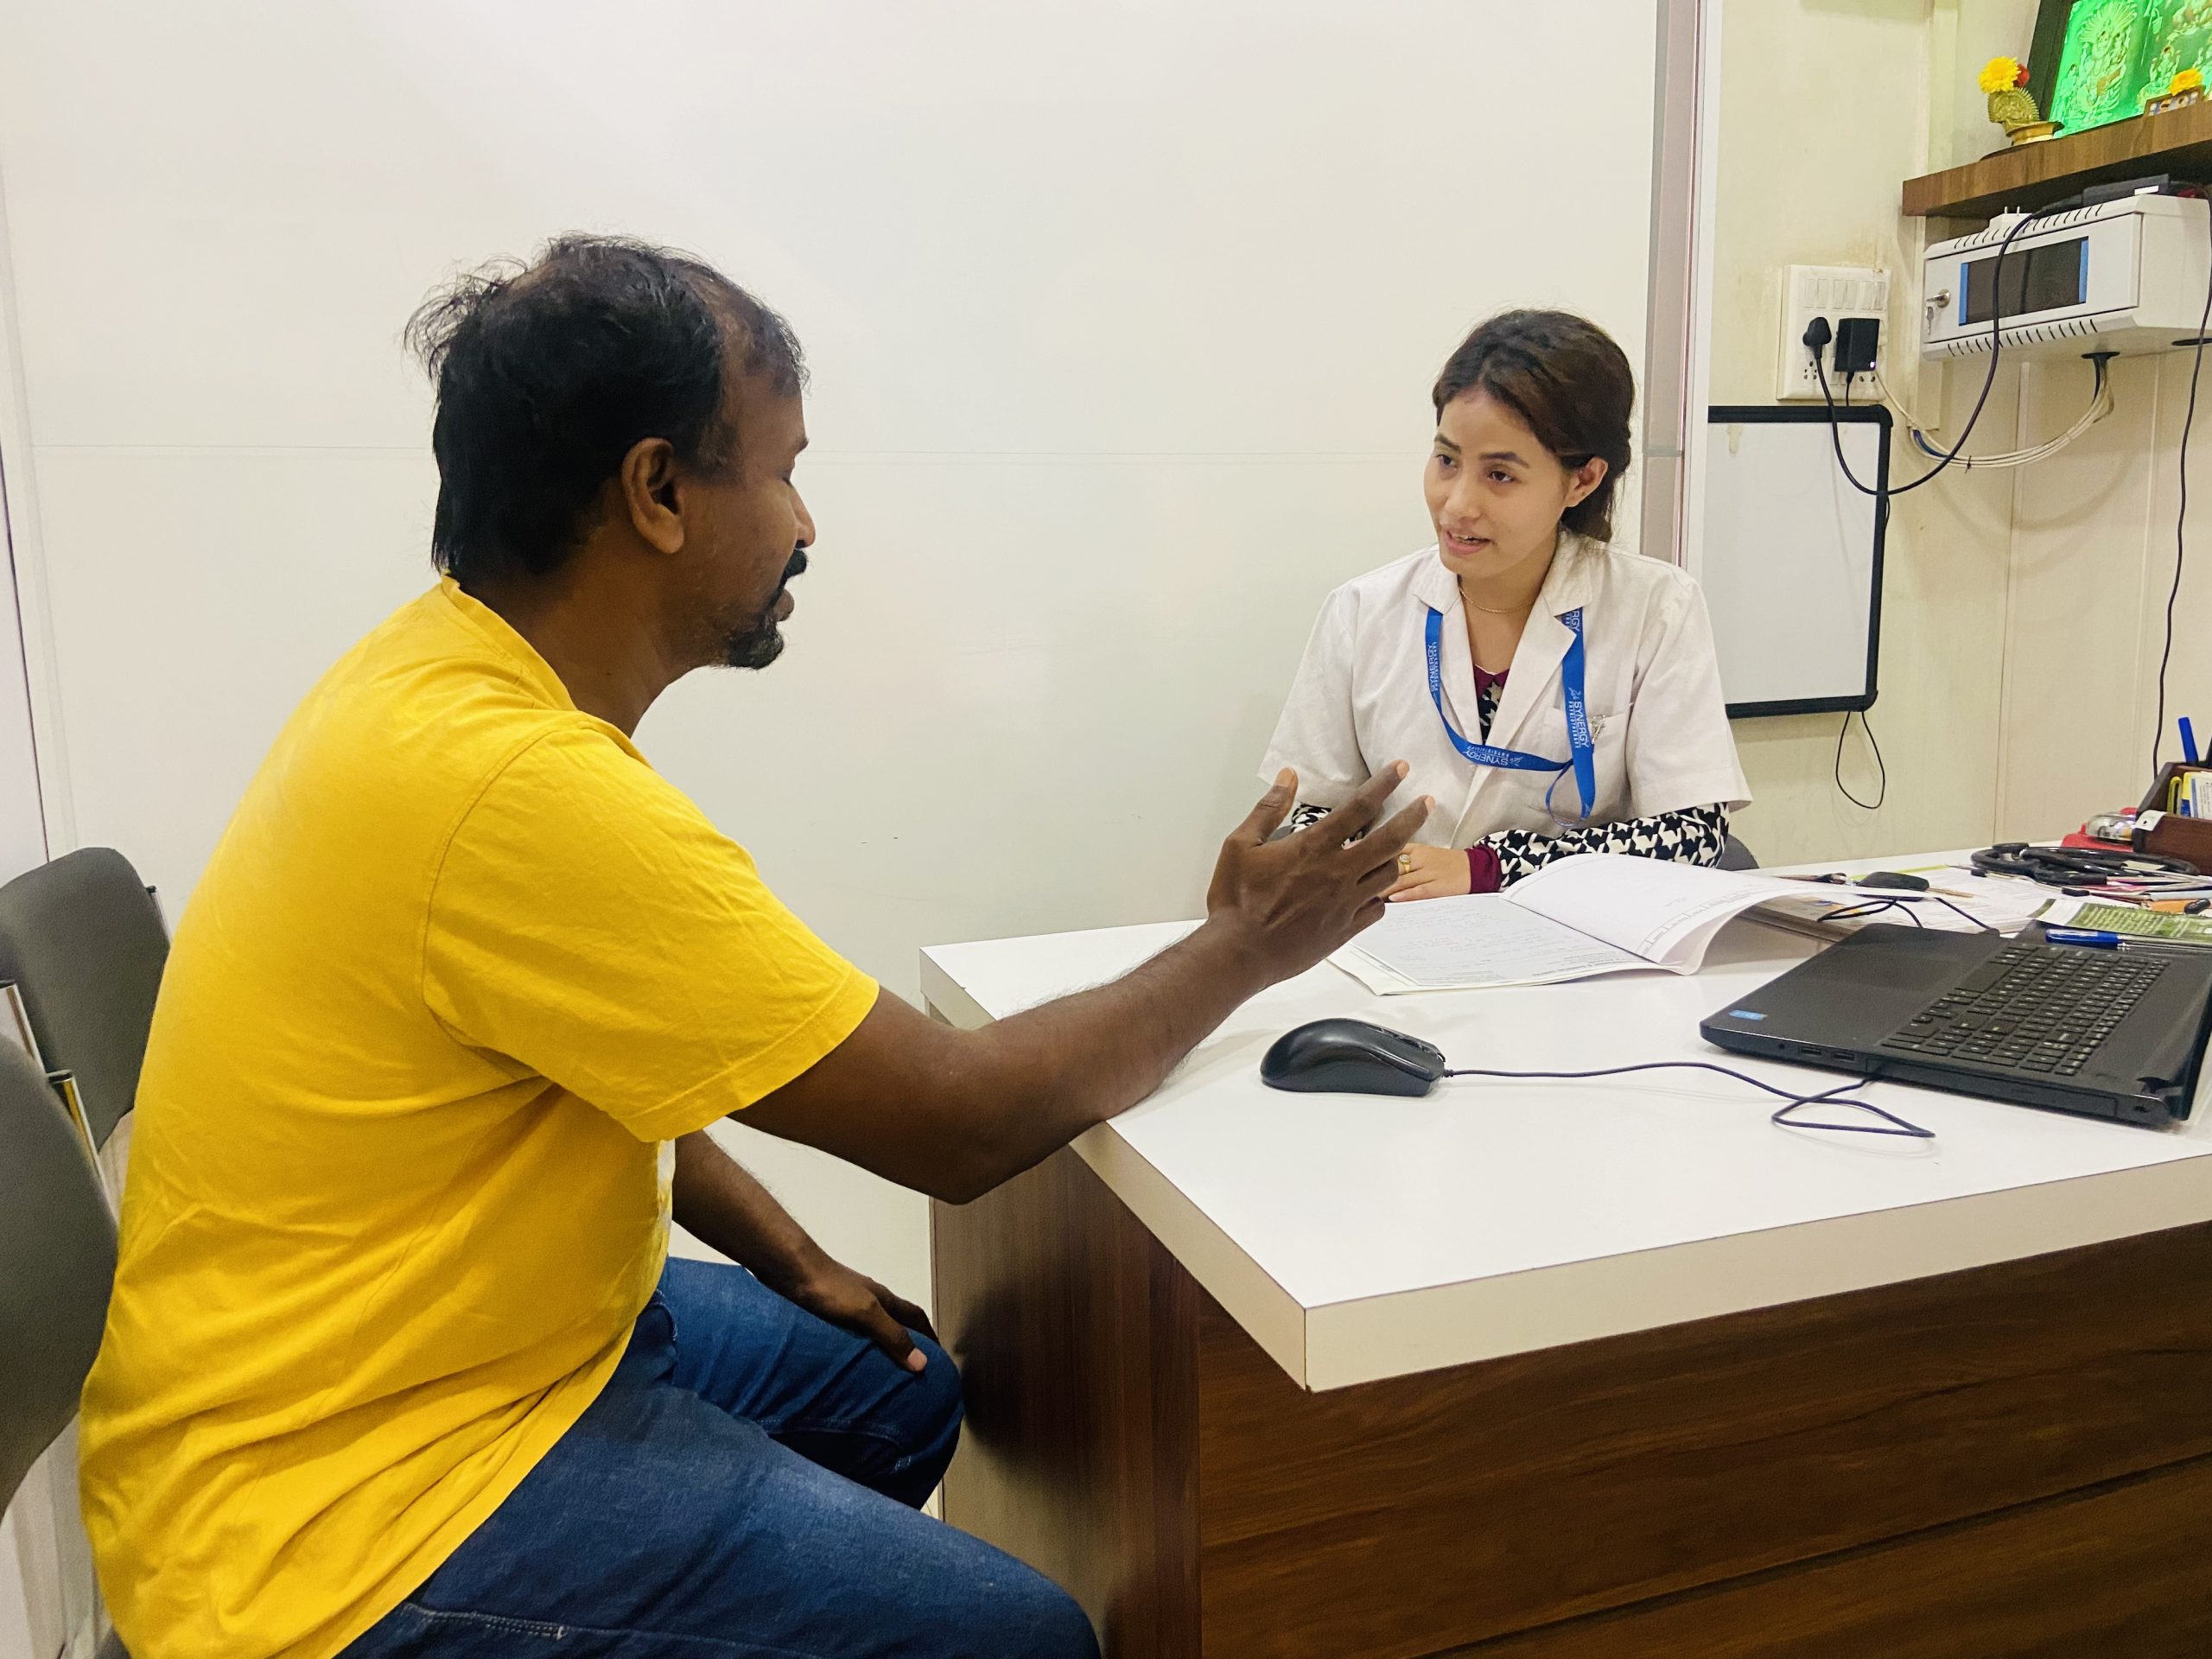 patient assessment in bangalore,synergy physiotherapy clinic in pai layout